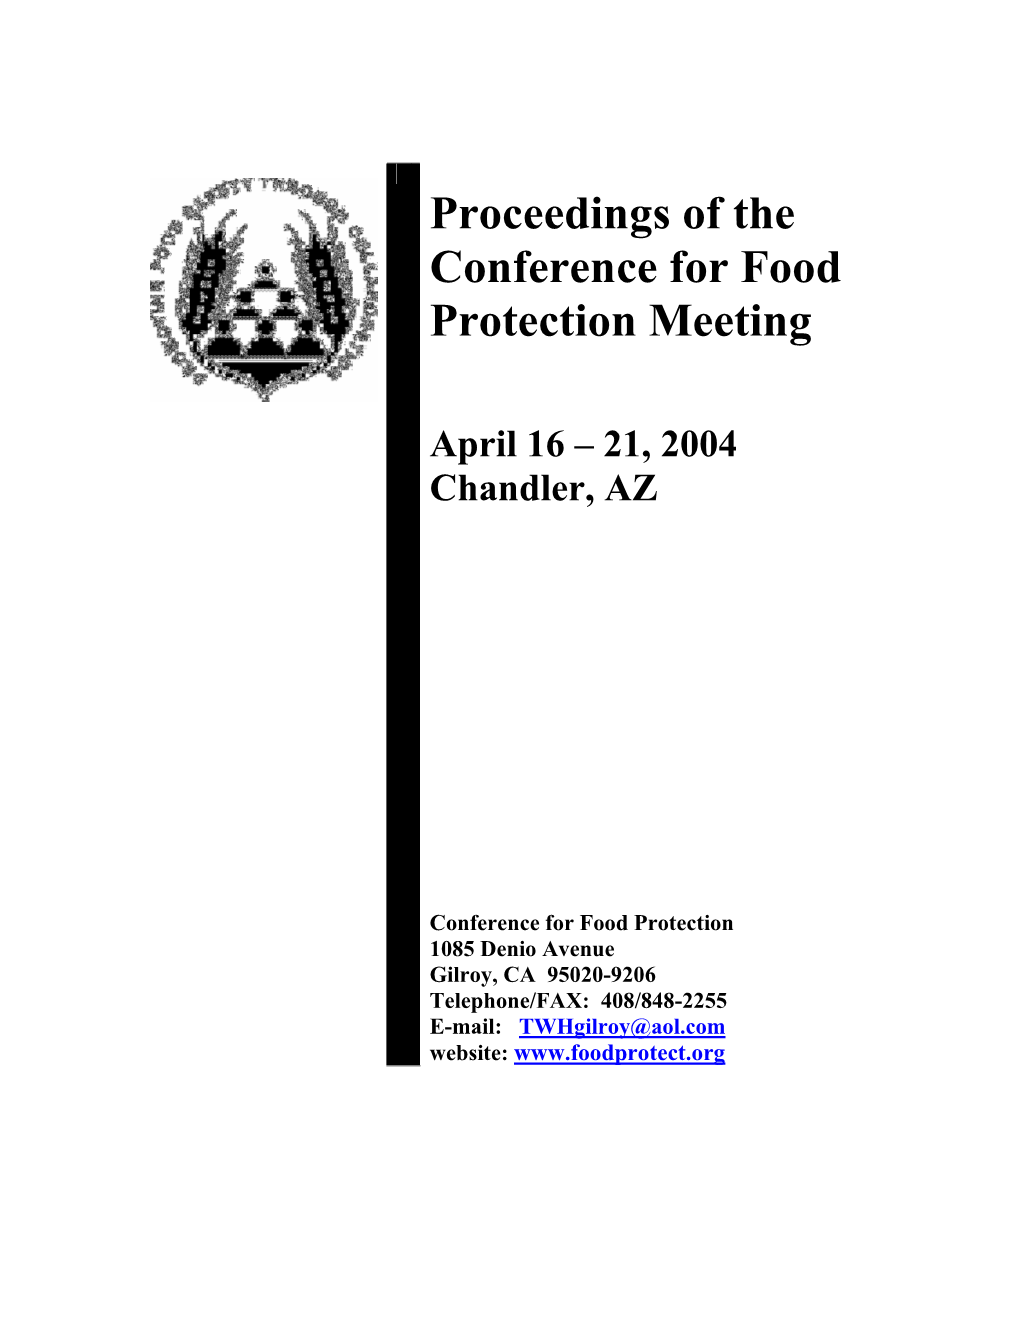 Proceedings of the Conference for Food Protection Meeting